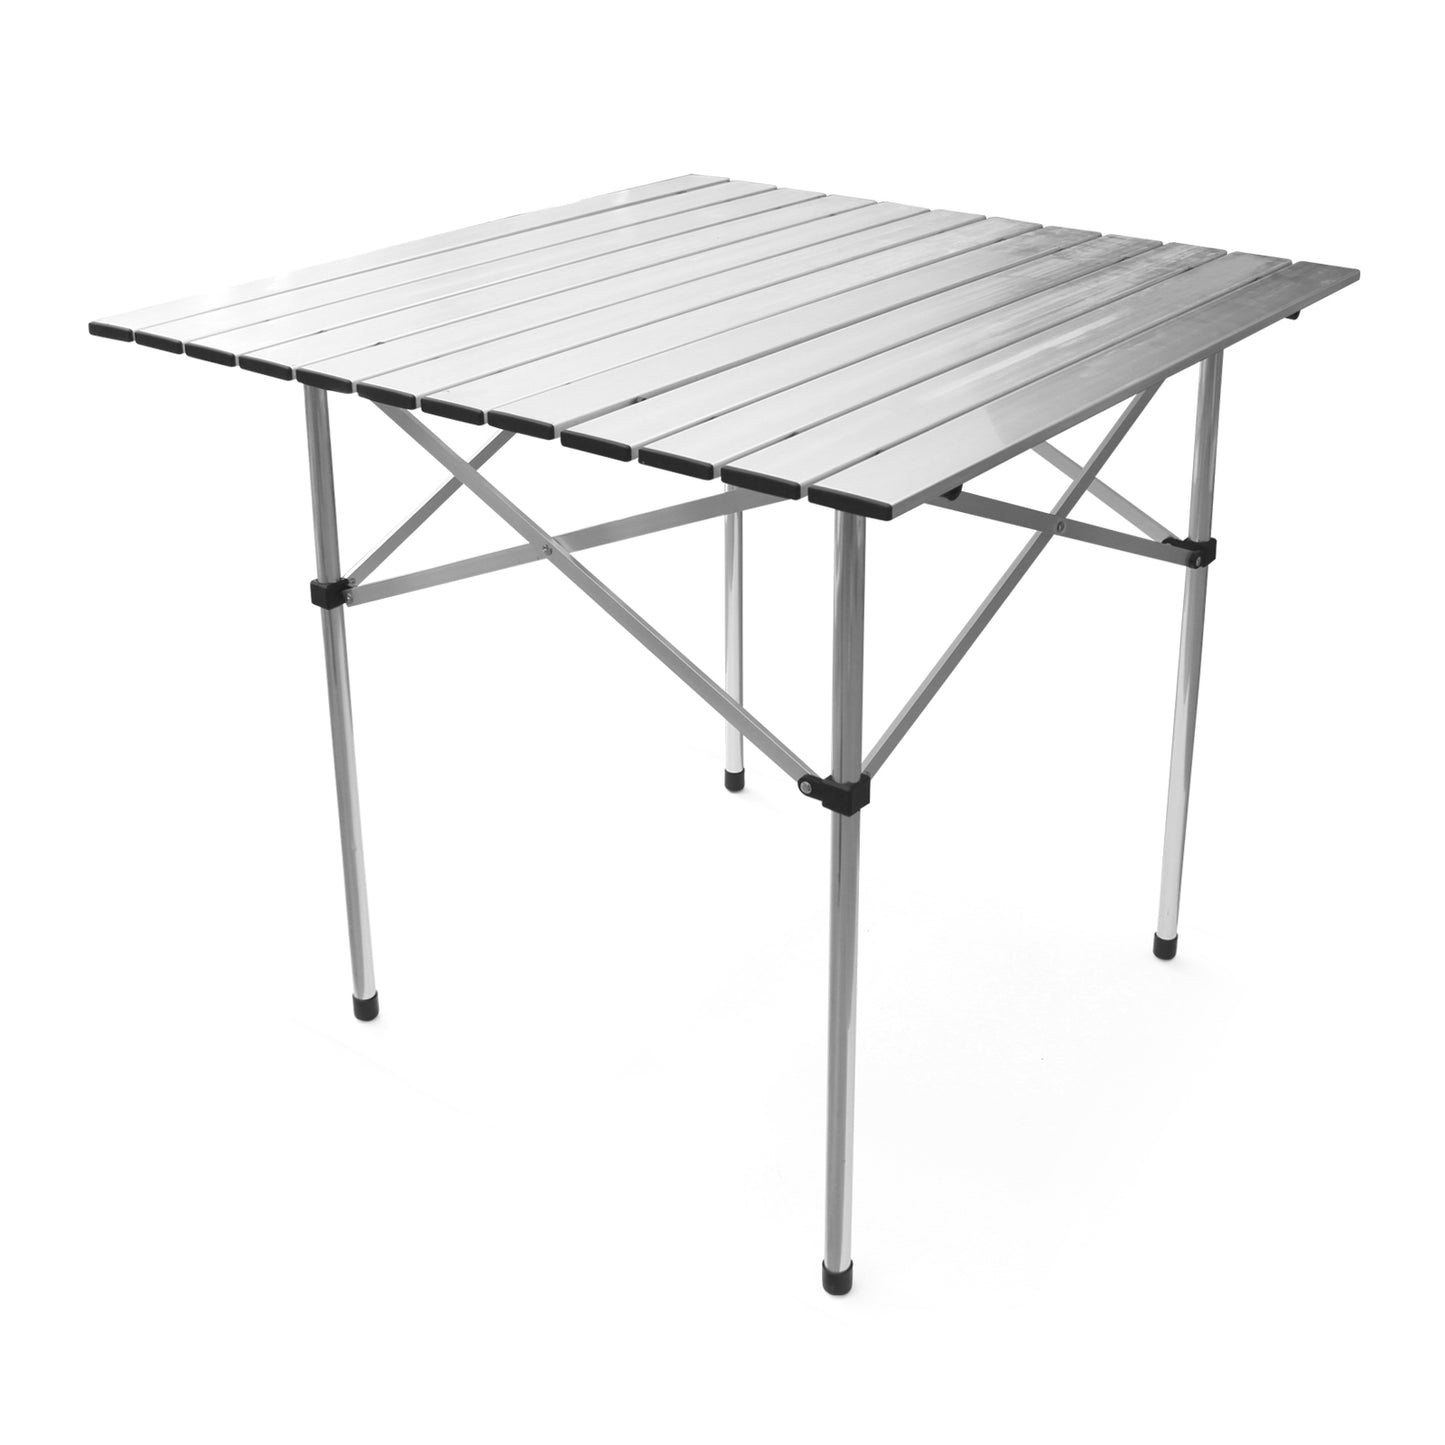 Single Aluminium Roll Top Table for Camping, Picnics and Fishing